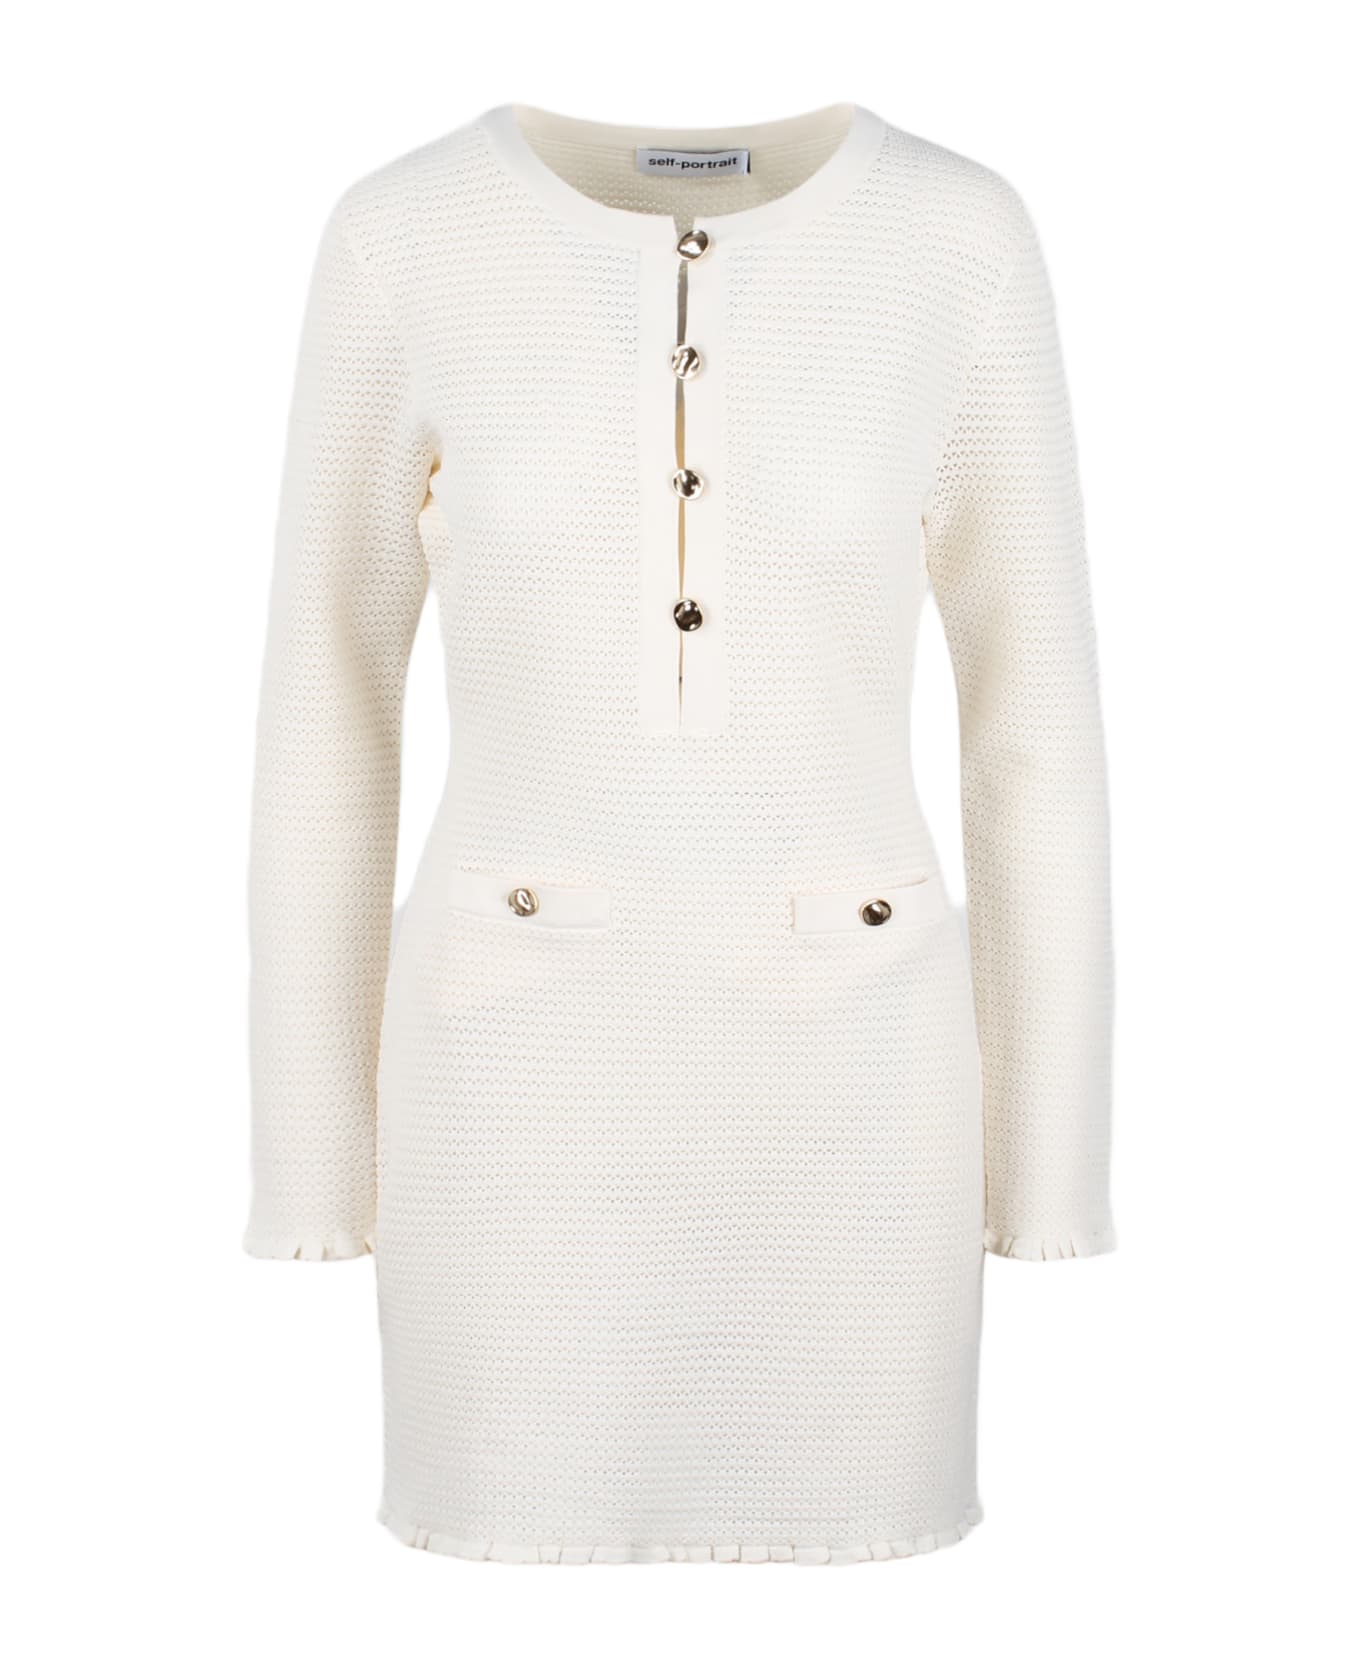 self-portrait Mini White Knit Dress With Buttons In Fabric Woman - White